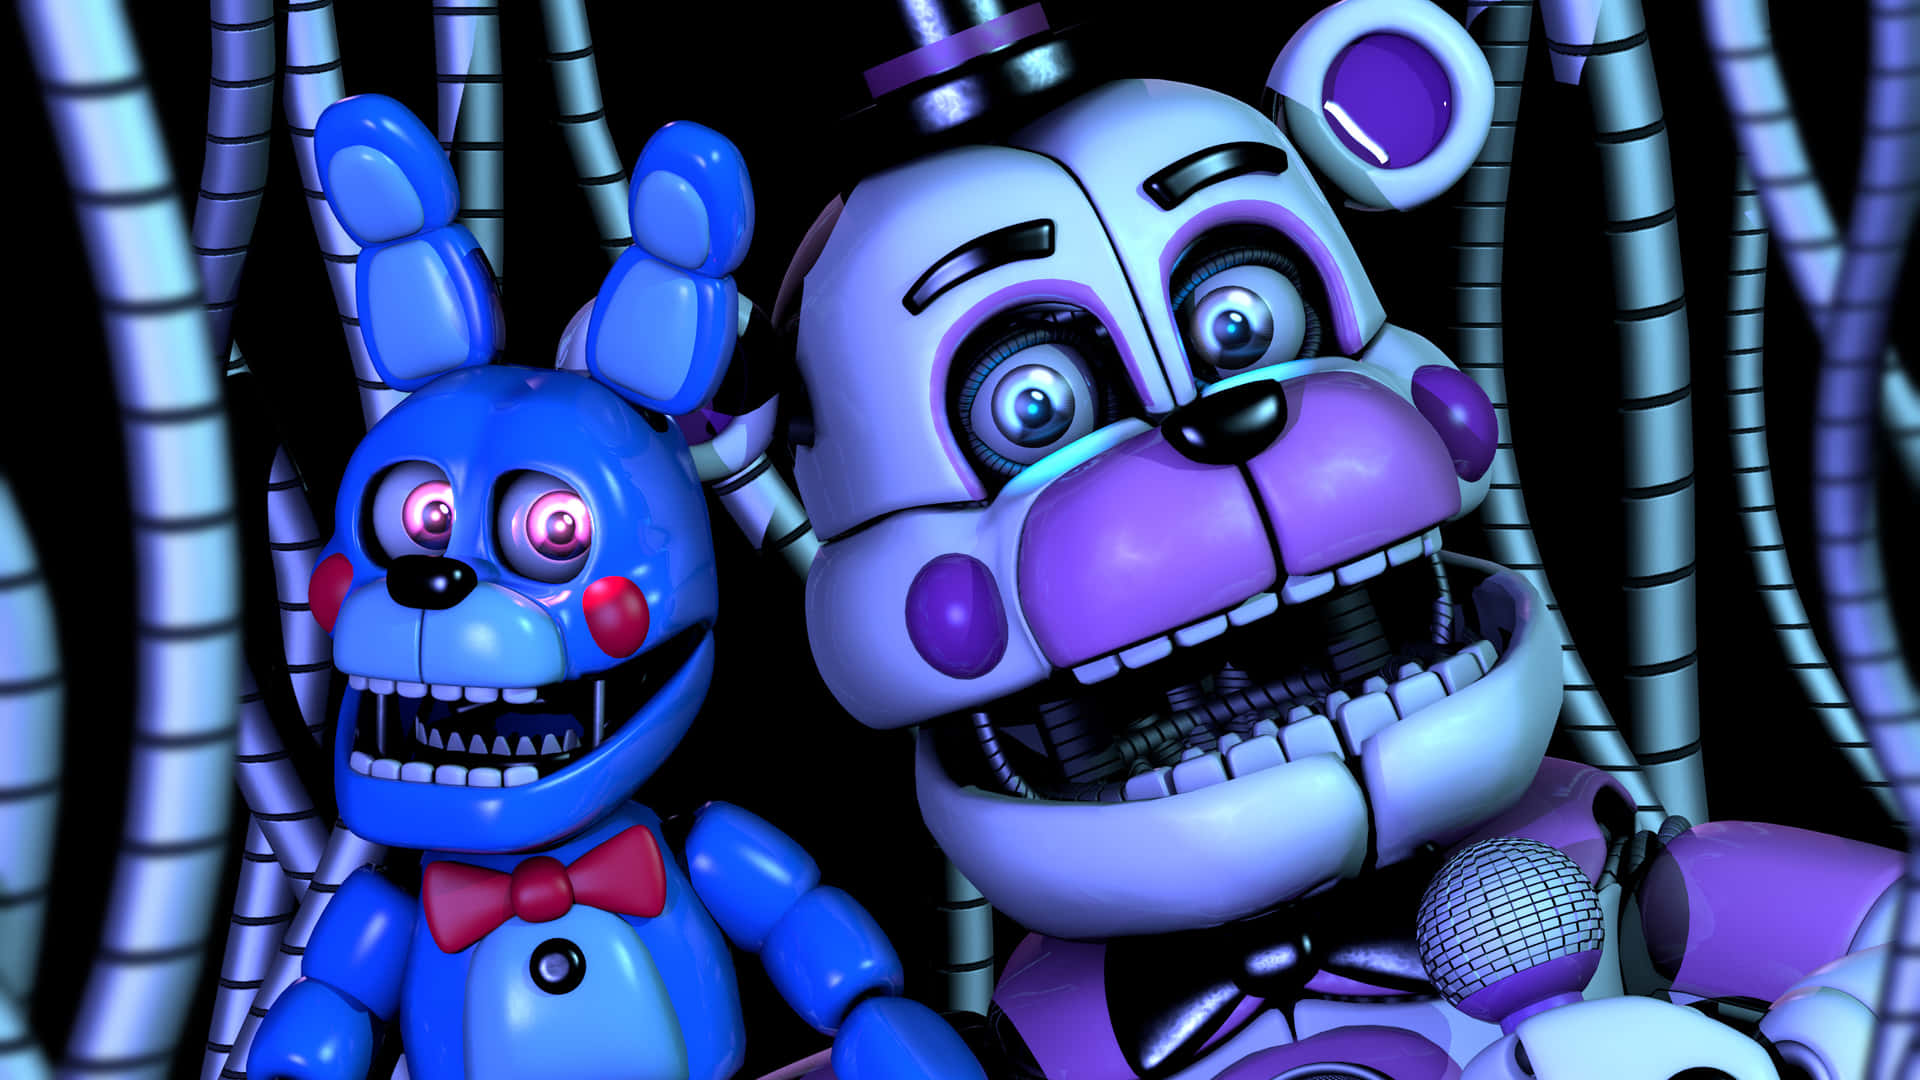 Babysitters Wanted - Are Your Ready to Join the FNaF Daycare Team?